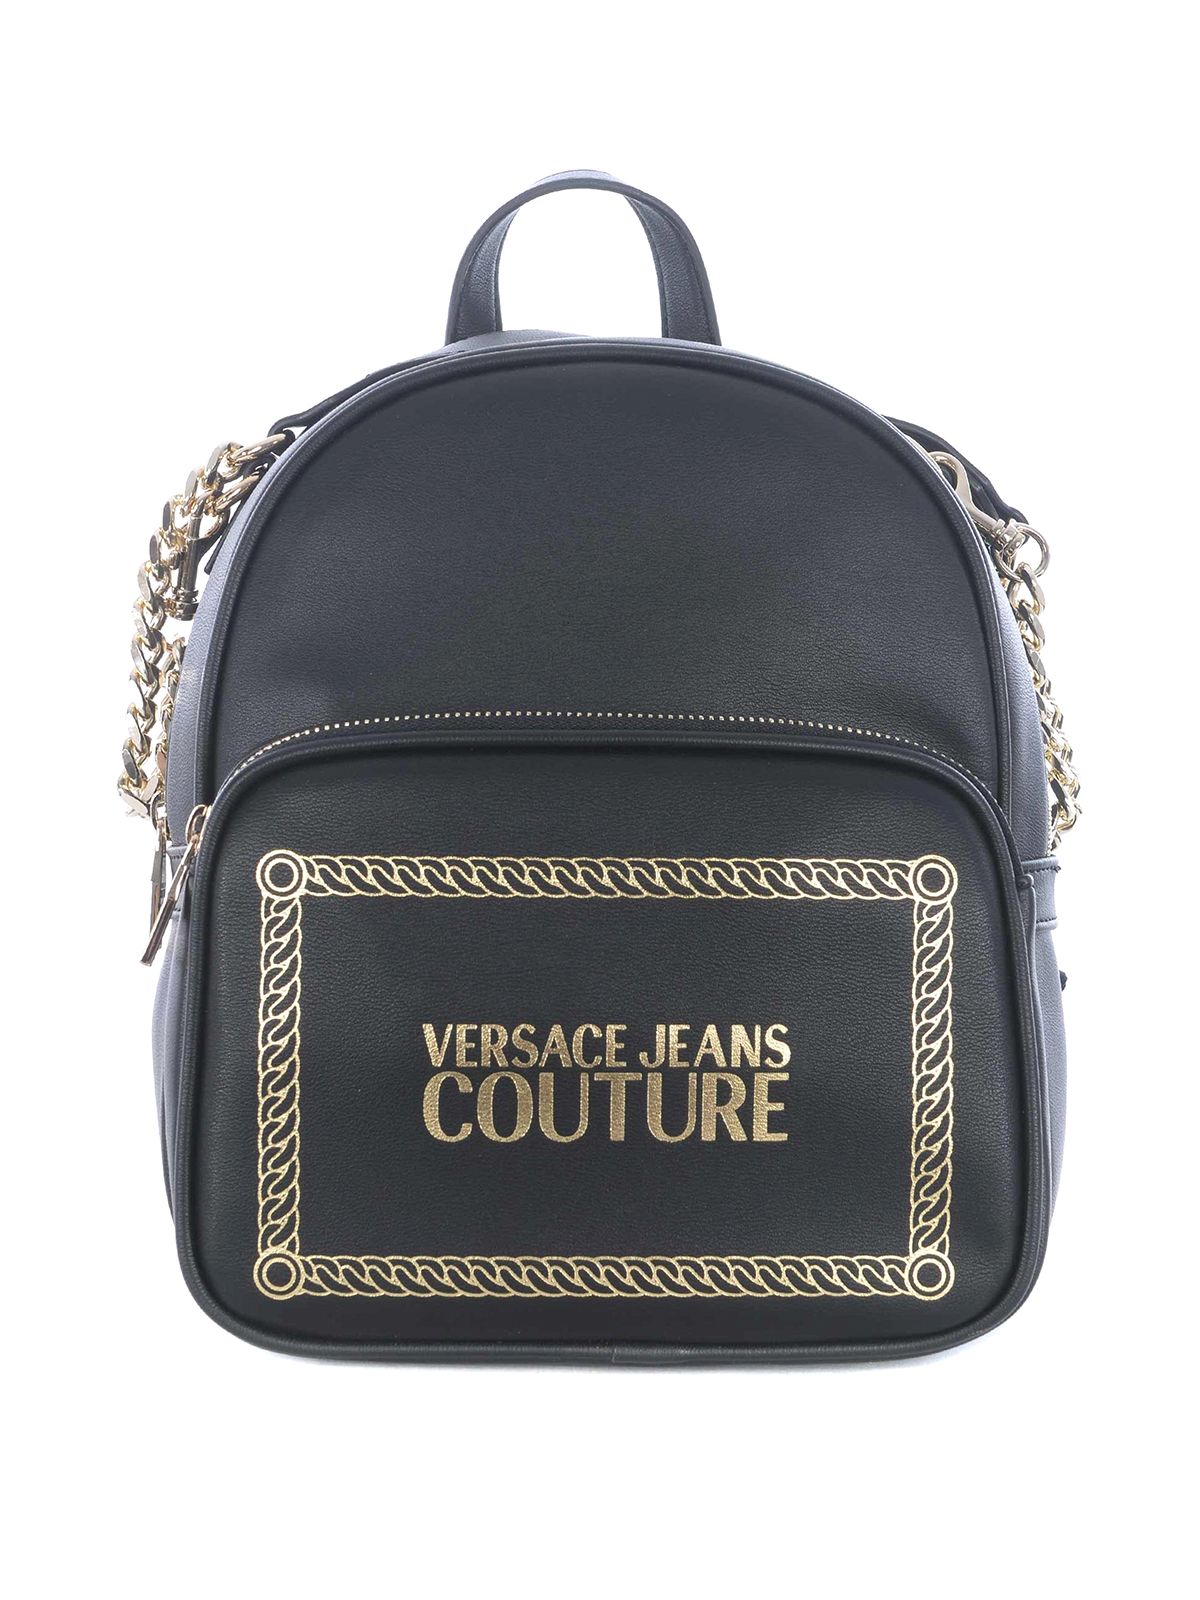 versace jeans backpack